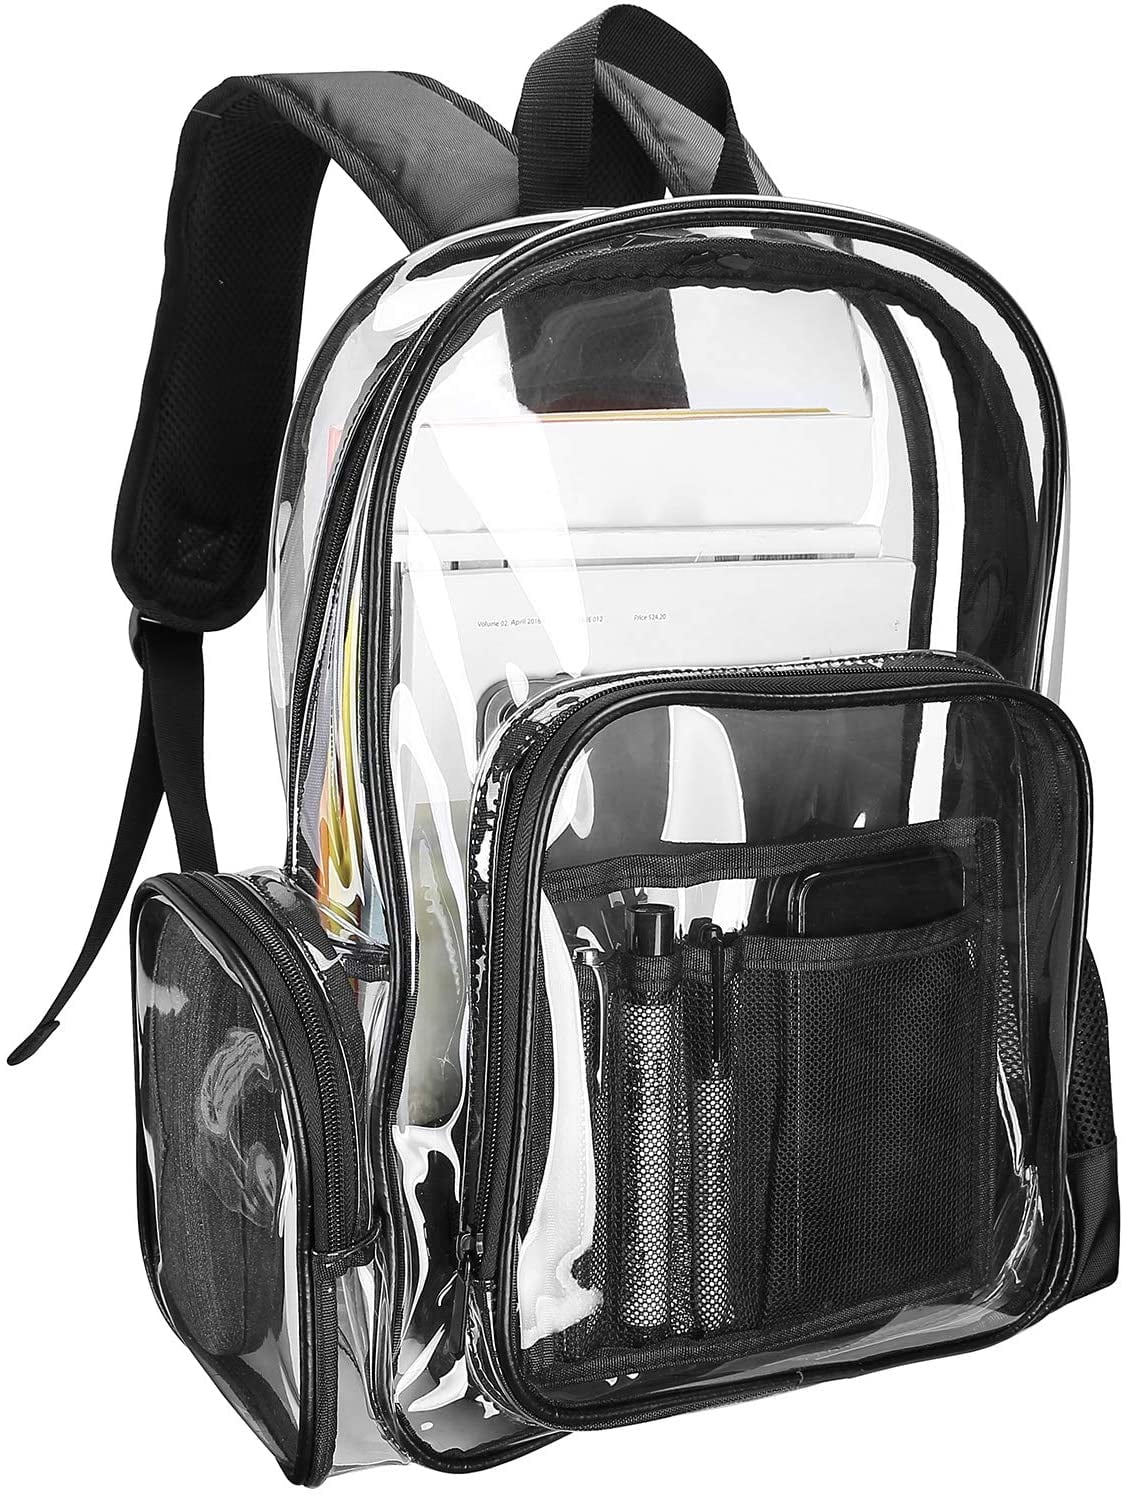 Transparent Bookbag for Work Transparent Vinyl Security Backpack，Clear Backpack Security Travel & Sporting Event Black Heavy Duty See Through Backpack 